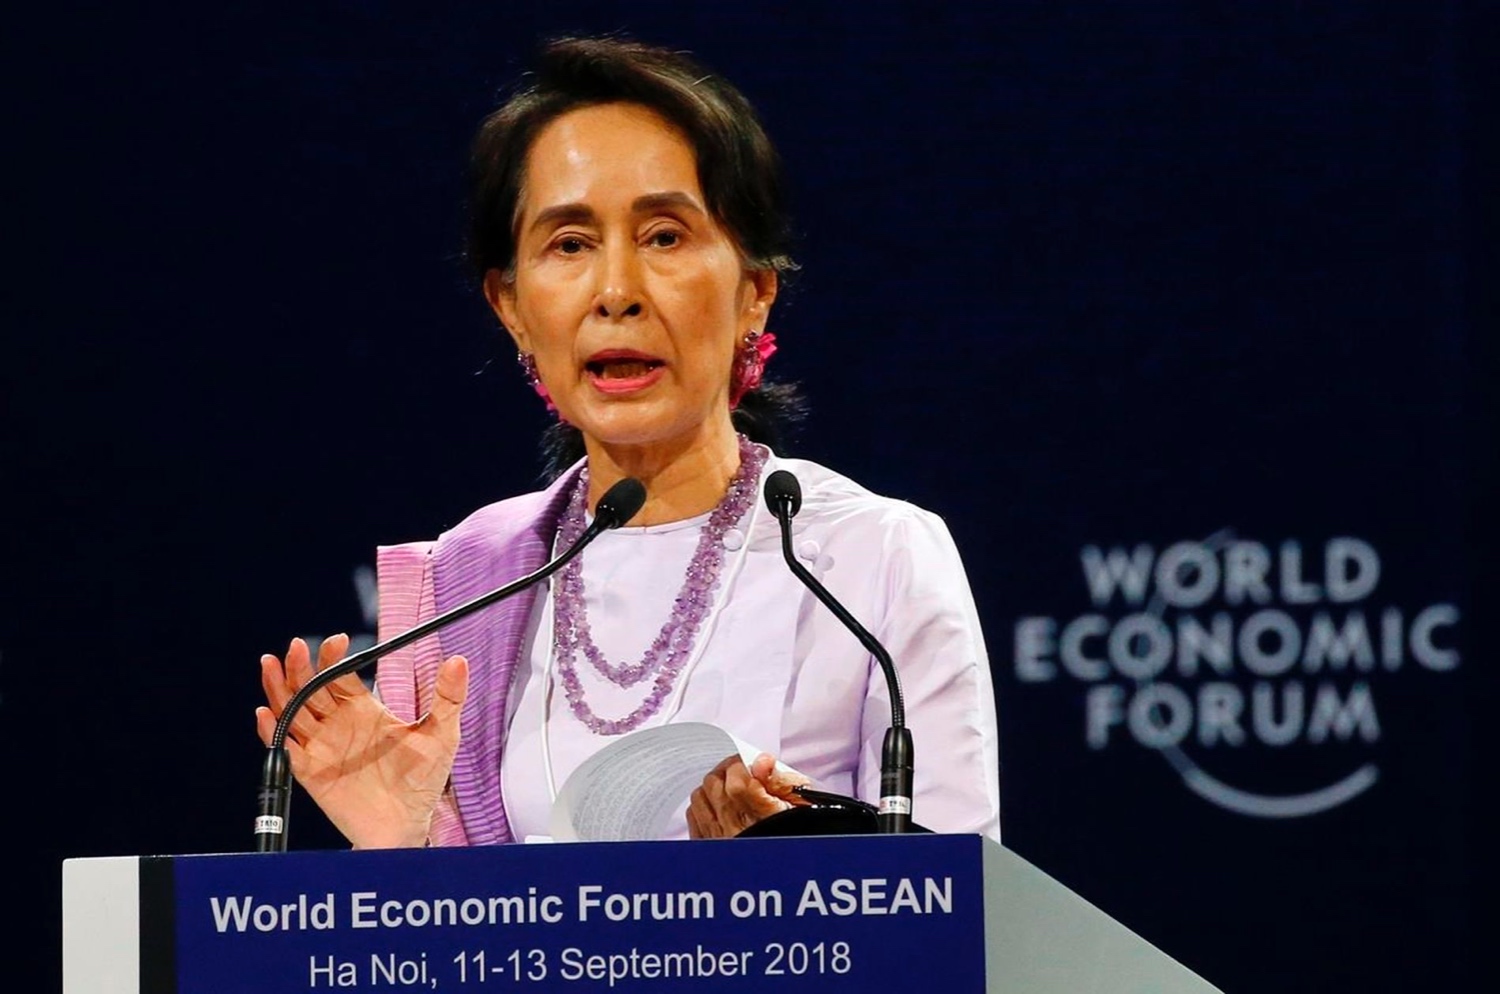 Myanmar’s de-facto leader Aung San Suu Kyi addresses participants during the opening session of the World Economic Forum on ASEAN, in Hanoi, Vietnam, on Sept. 12, 2018.  BULLIT MARQUEZ/THE ASSOCIATED PRESS